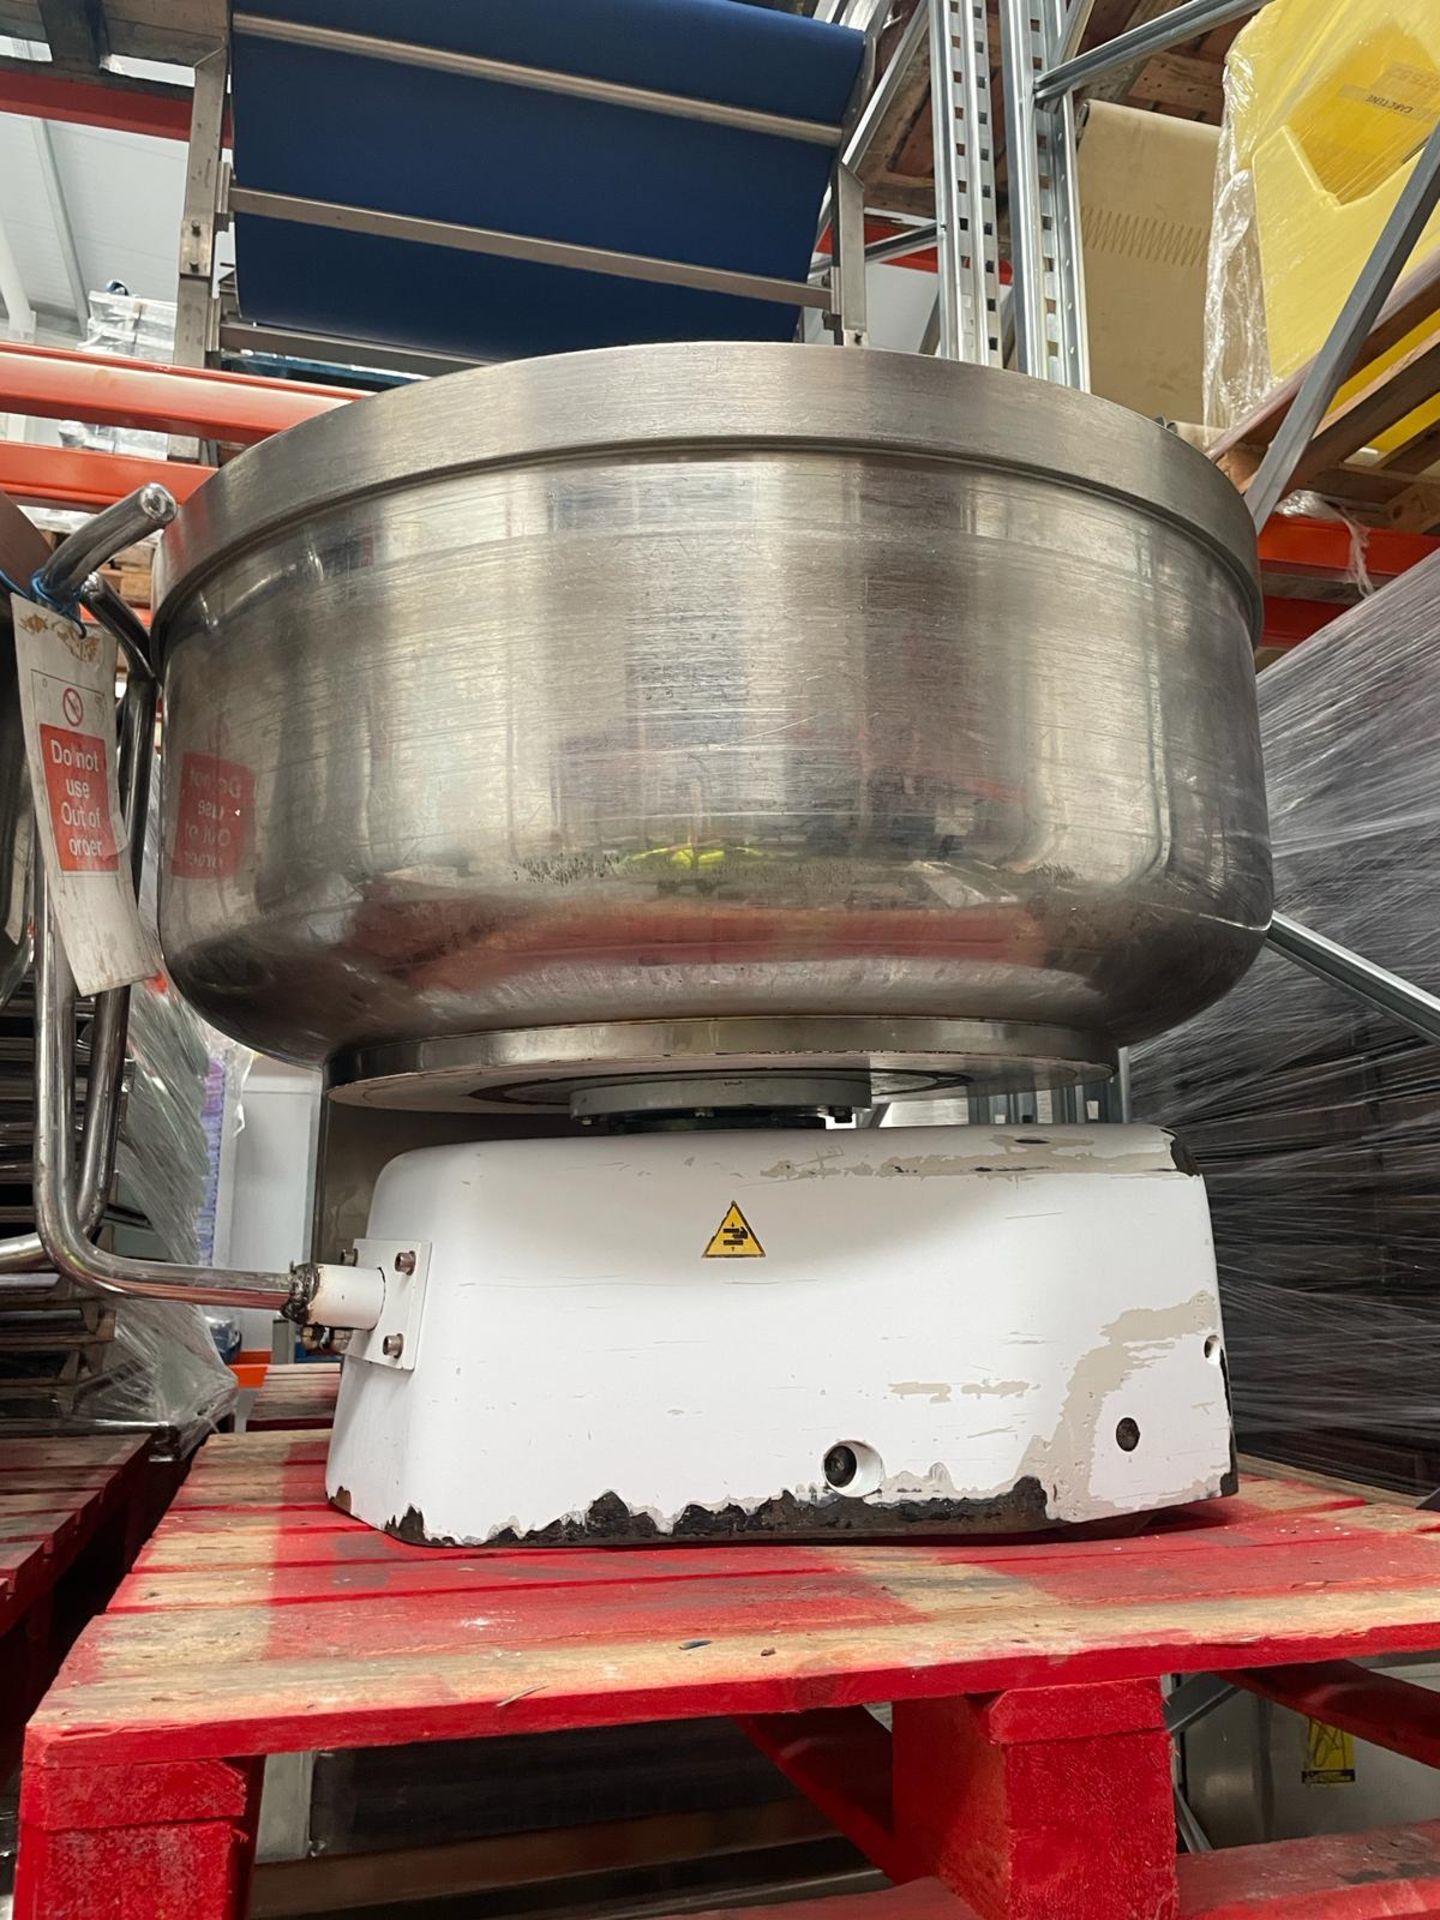 2004 Esmach SPA Spiral Mixer with Stainless Steel Bowl. Please note this lot is located at Unit - Image 2 of 2